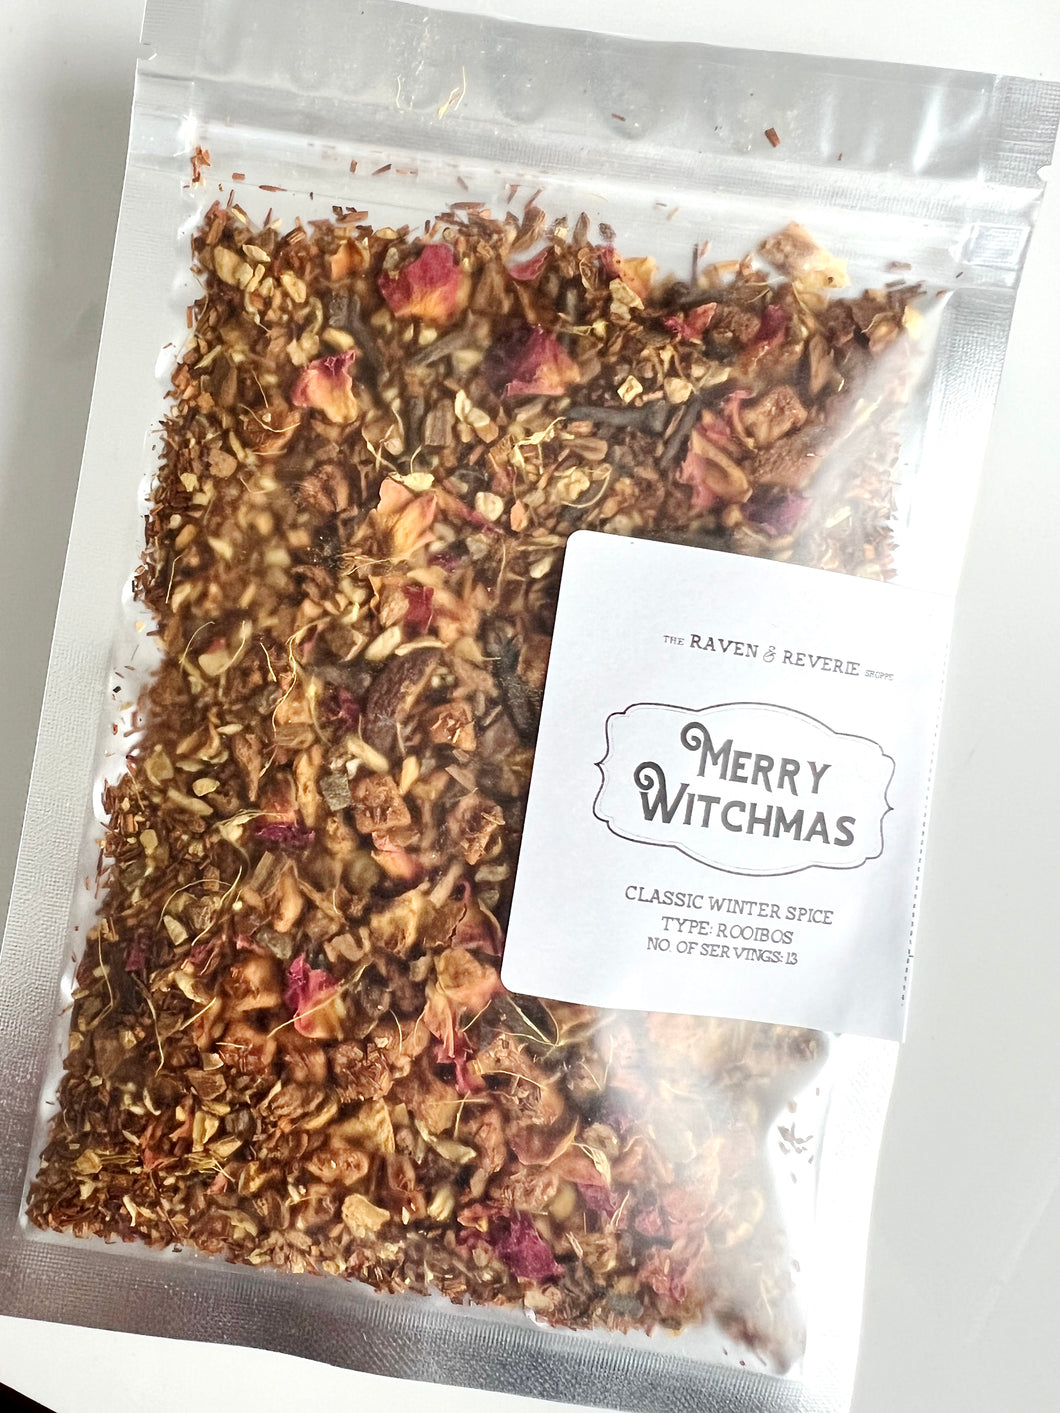 Merry Witchmas - classic winter spice rooibos loose leaf tea